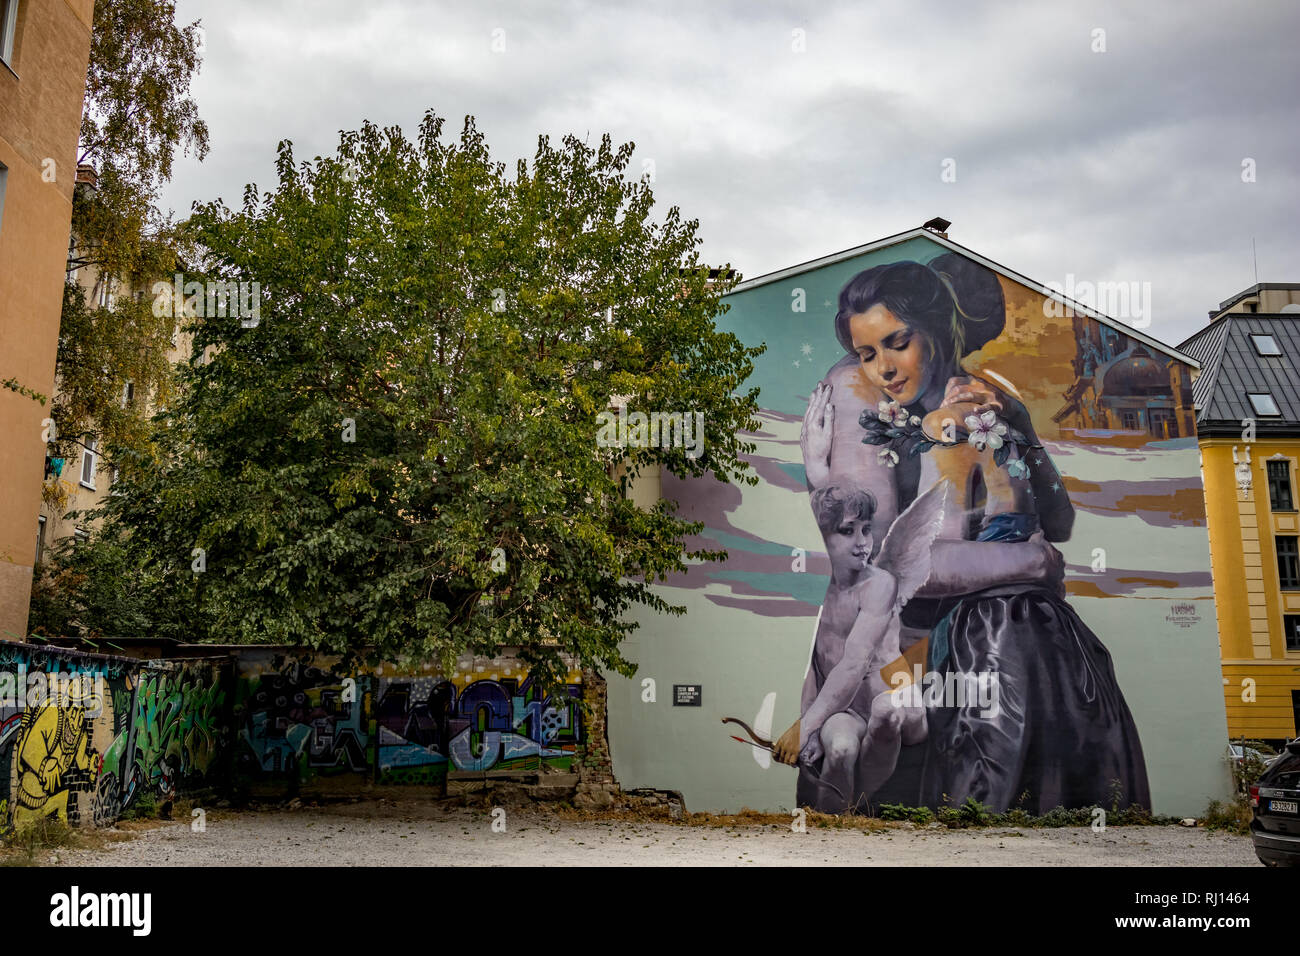 SOFIA, BULGARIA - OCTOBER 14, 2018: Backyard, car parking space has its walls painted with graffiti by several artists, central part of Bulgarian capital. Moody cloudy autumn afternoon Stock Photo